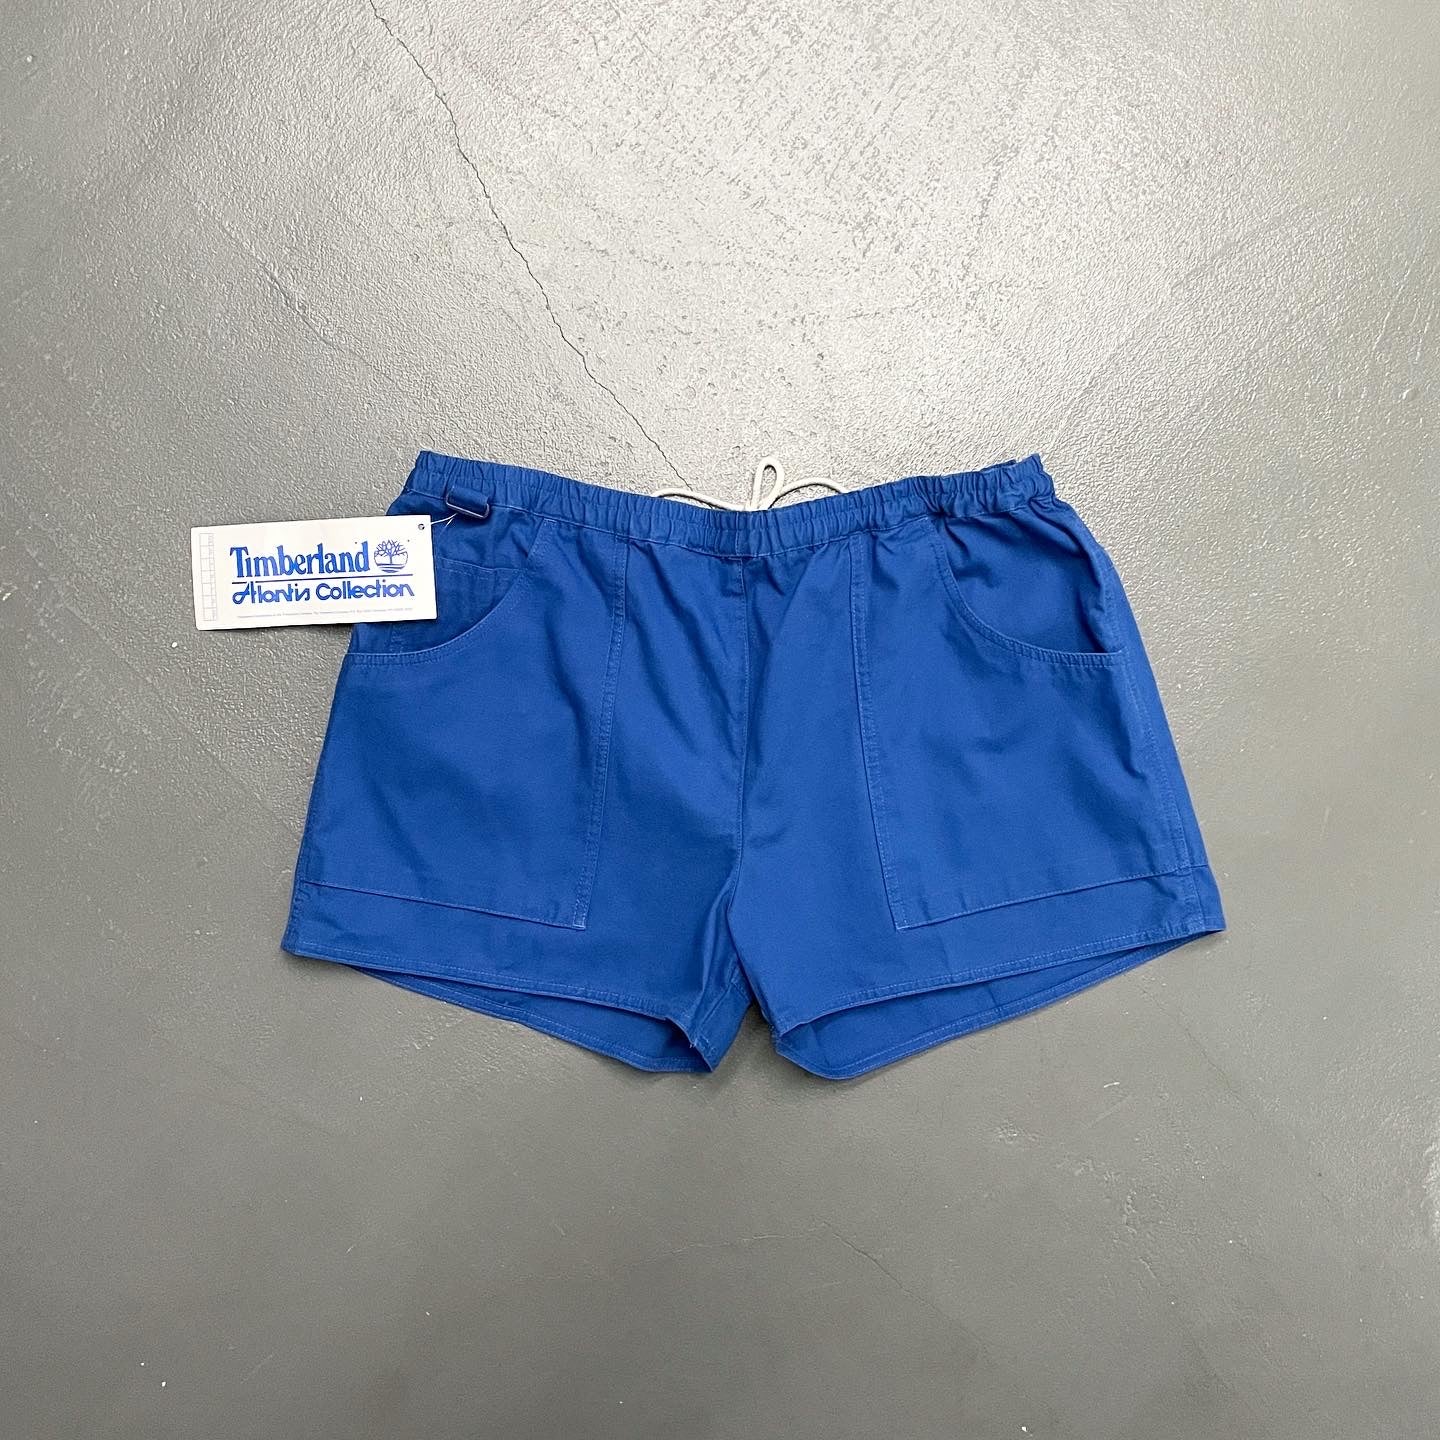 Timberland Alontis Collection DeadStock Crew Shorts